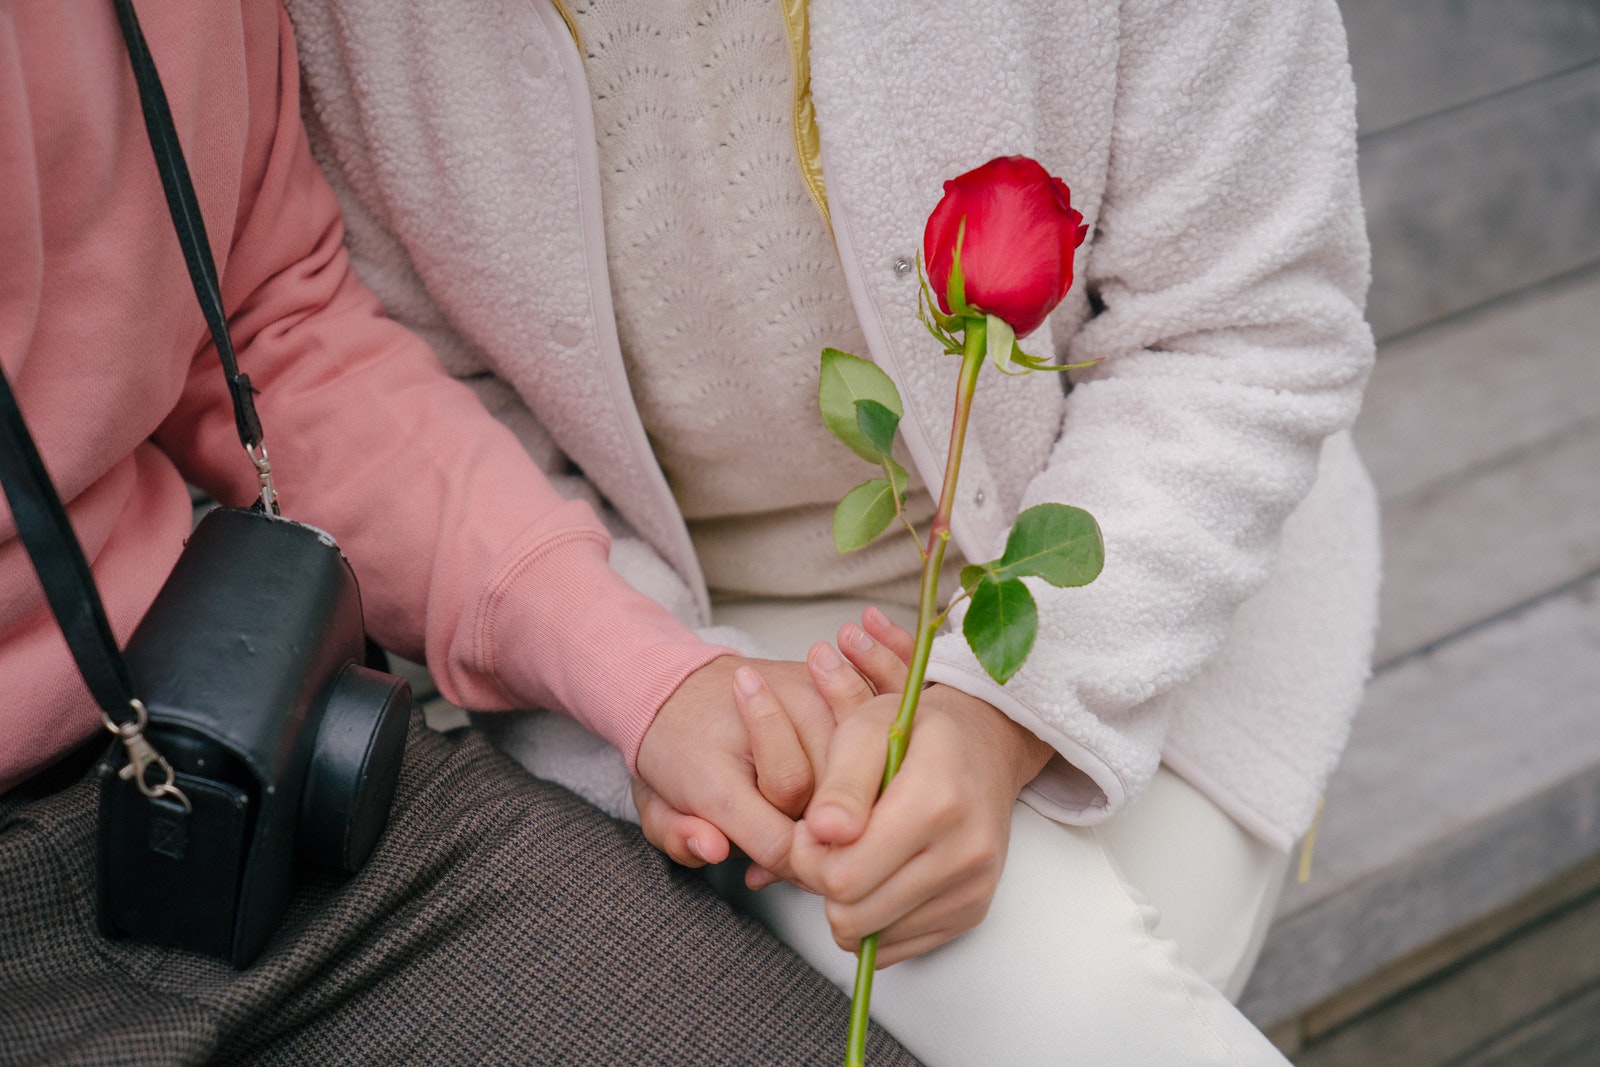 Crop Photo Of A Couple Sitting On A Bench With Red Rose